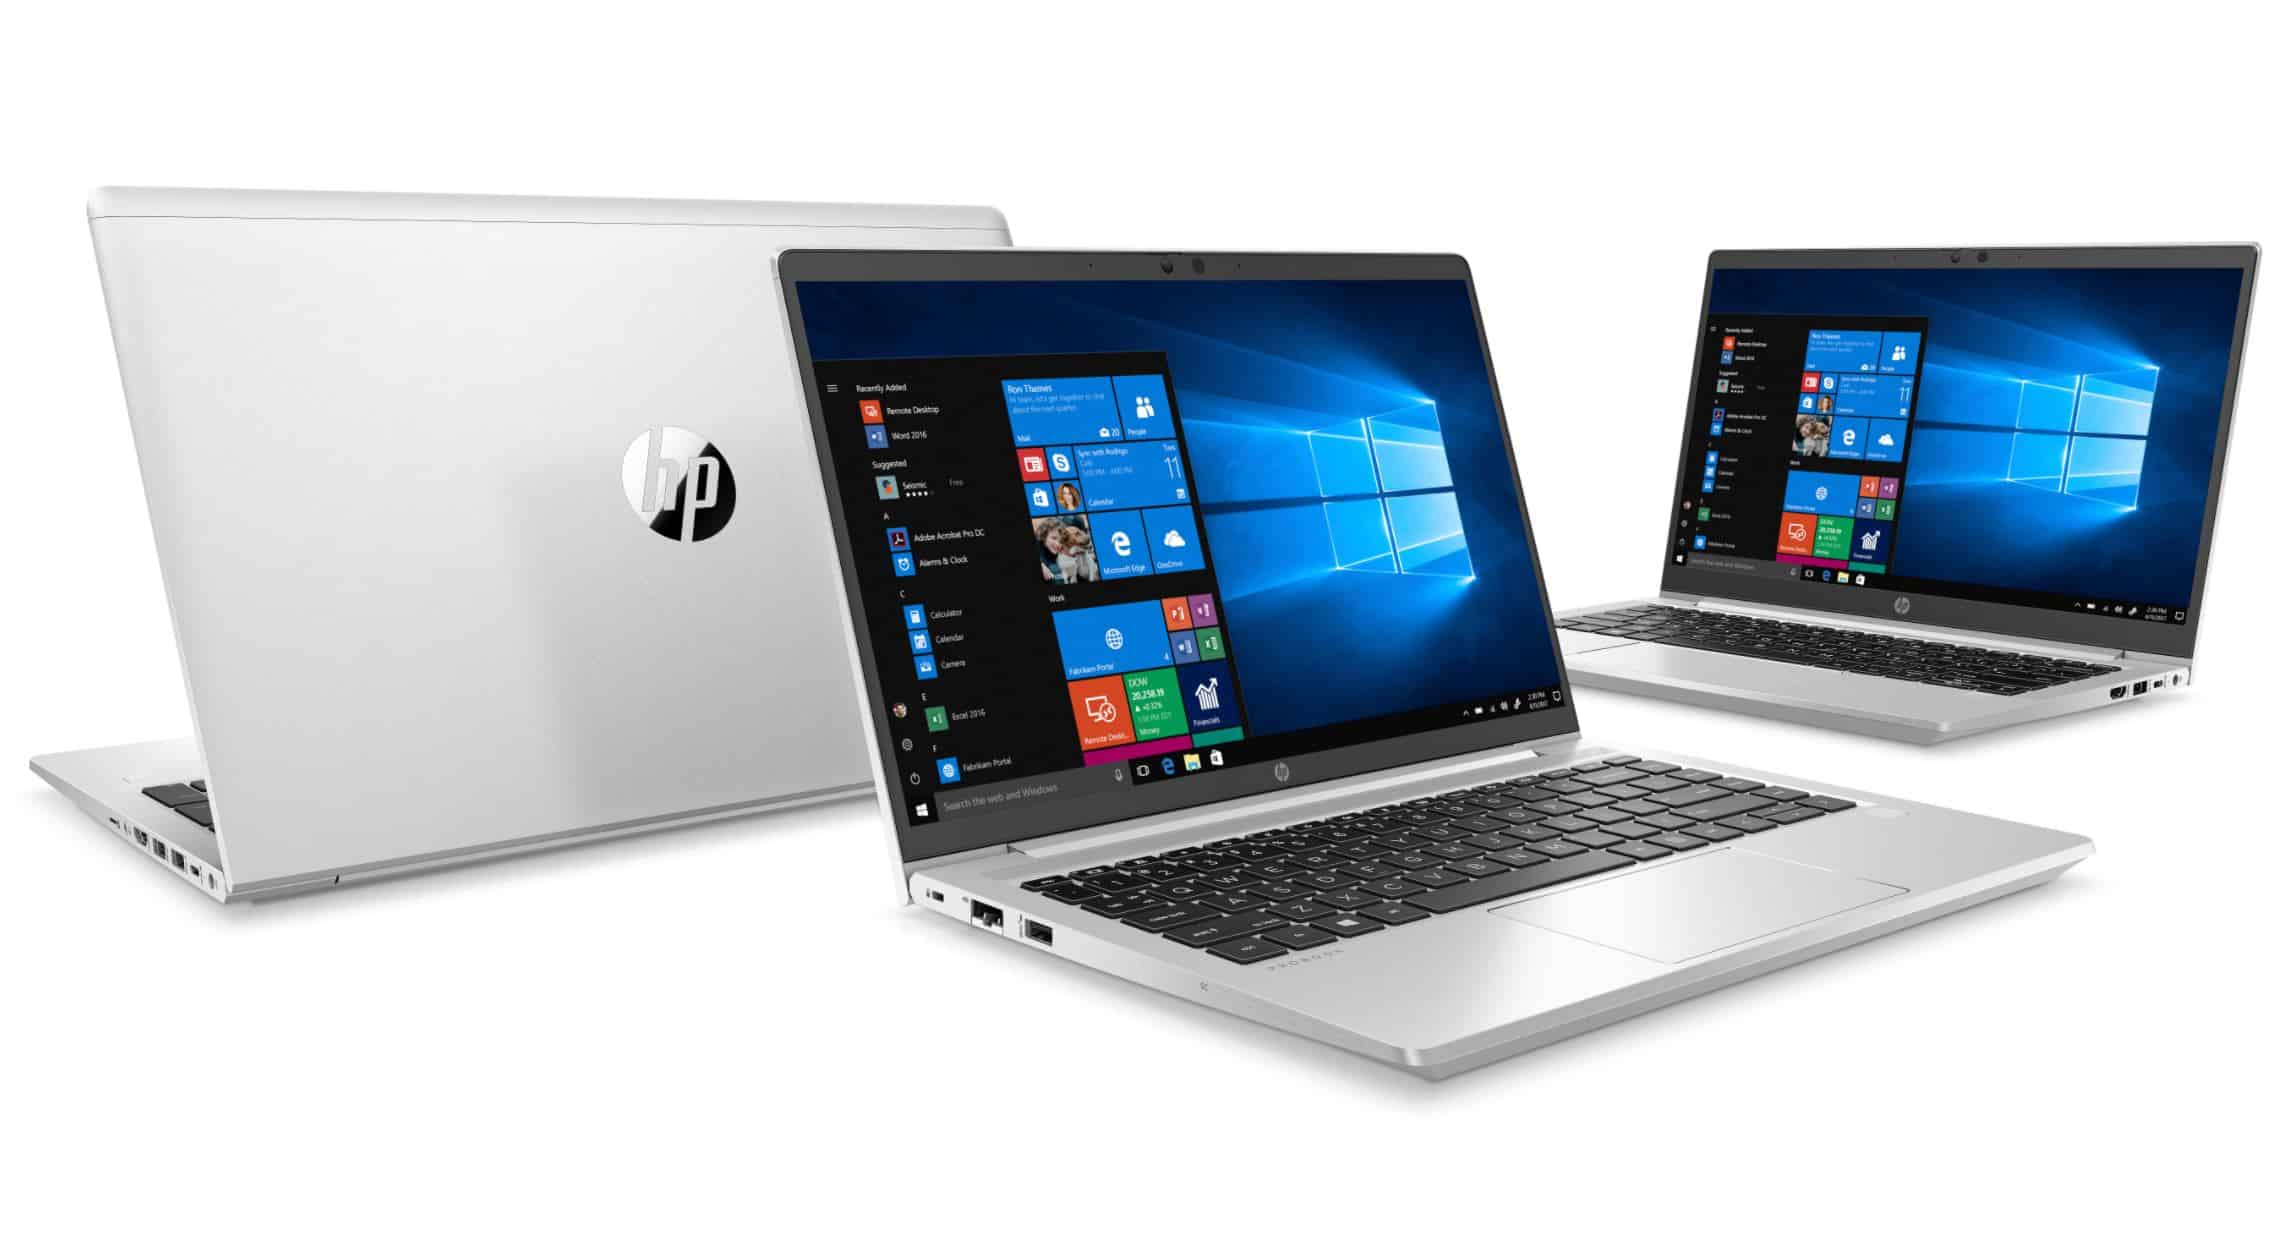 HP today announced a range of new PCs targeting the enterprise market - MSPoweruser